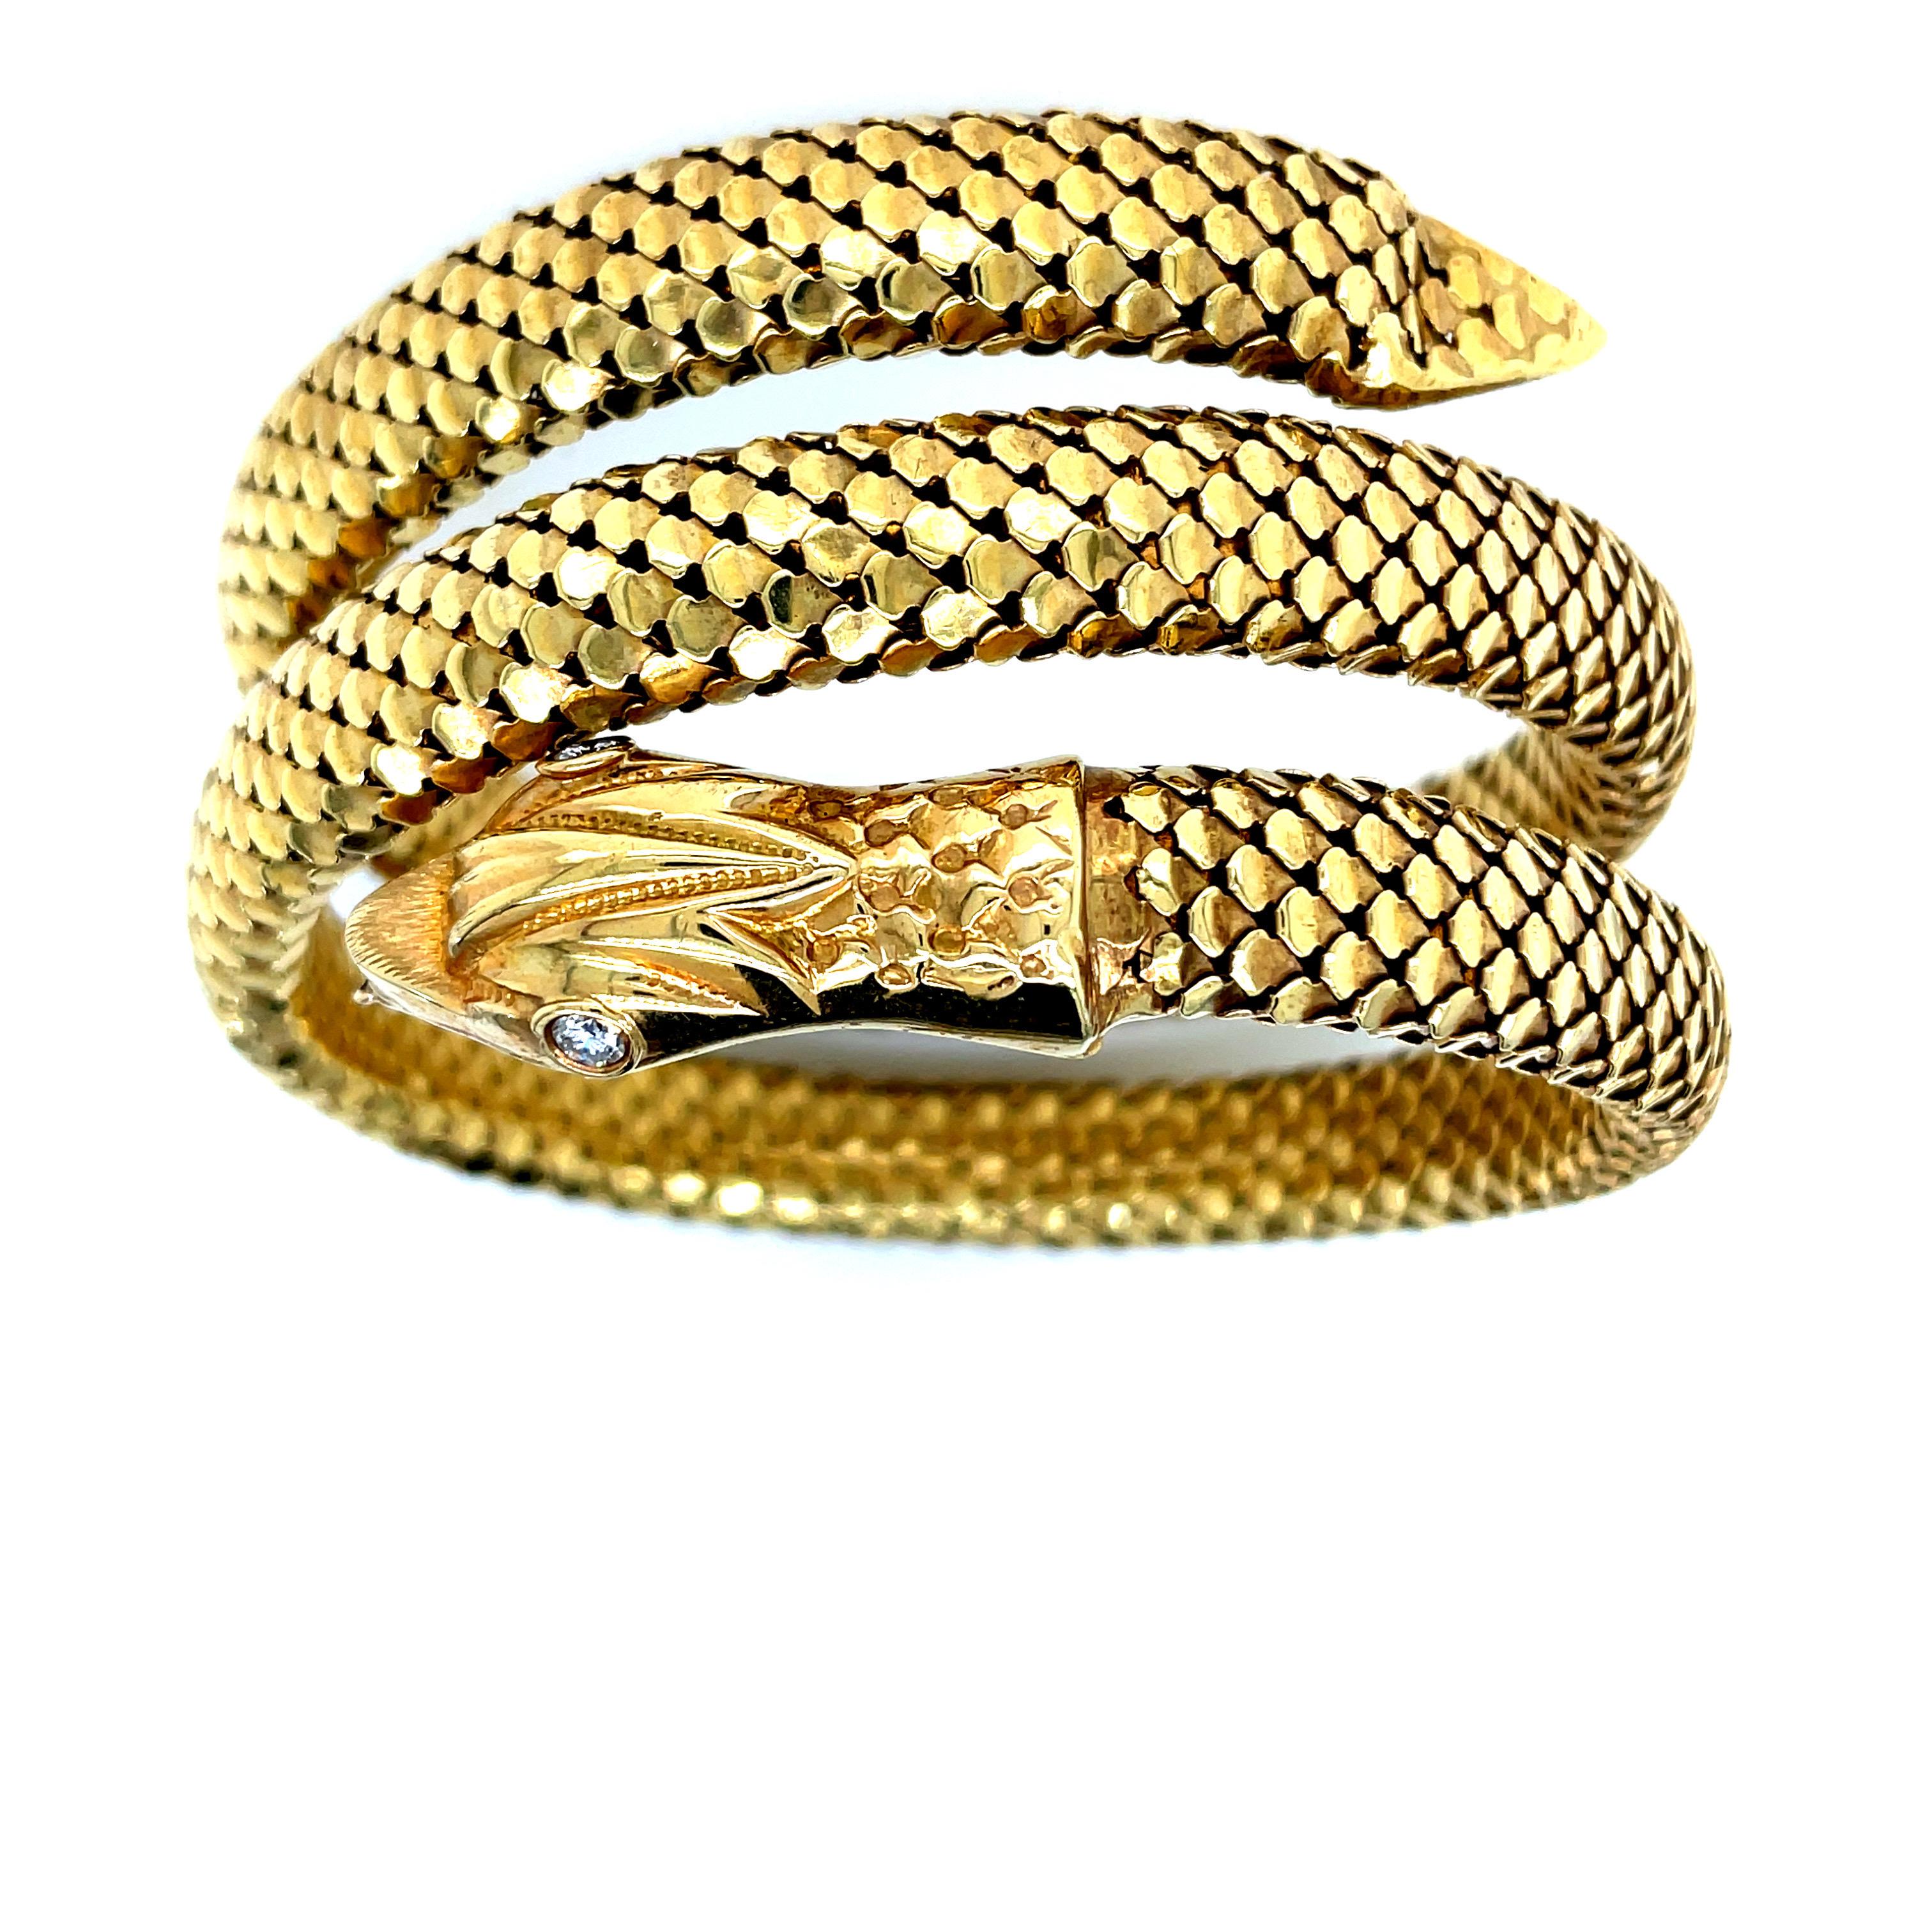 Vintage 1980s 18k Yellow Gold Snake Bracelet and Arm Band In Excellent Condition For Sale In Boston, MA